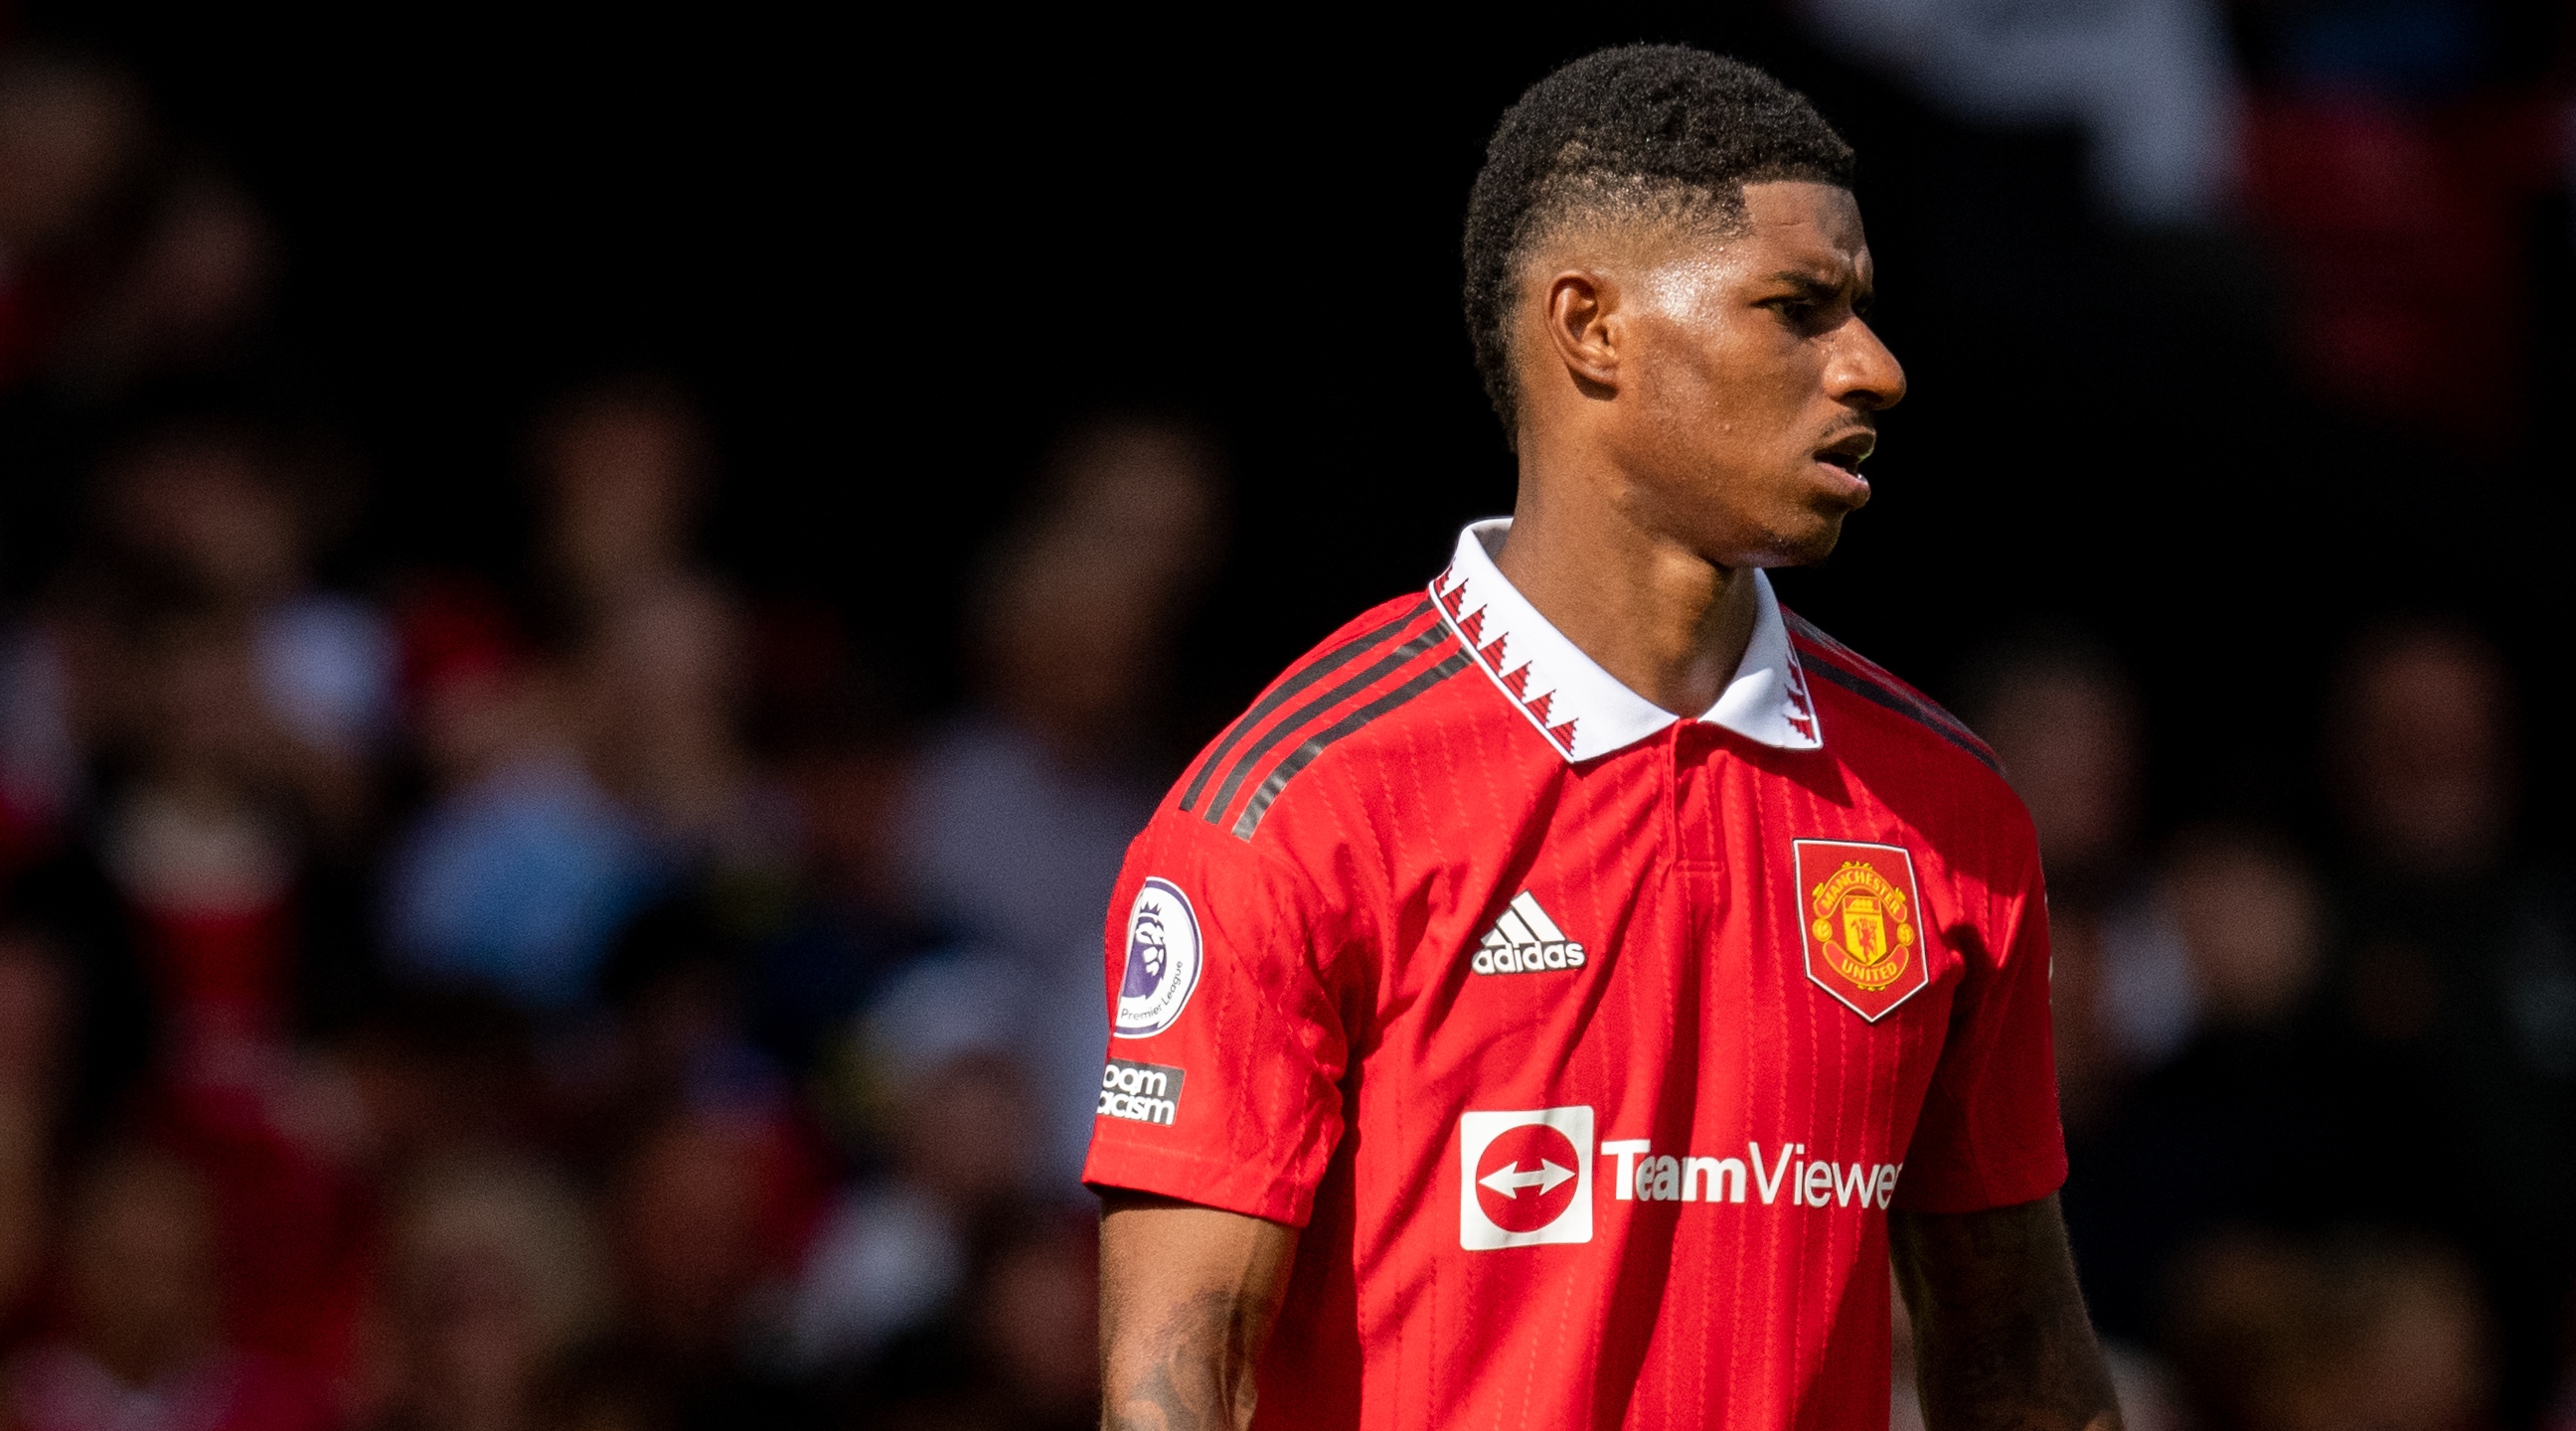 Marcus Rashford of Manchester United in action during the Premier League match between Manchester United and Brighton & Hove Albion at Old Trafford on August 07, 2022 in Manchester, England